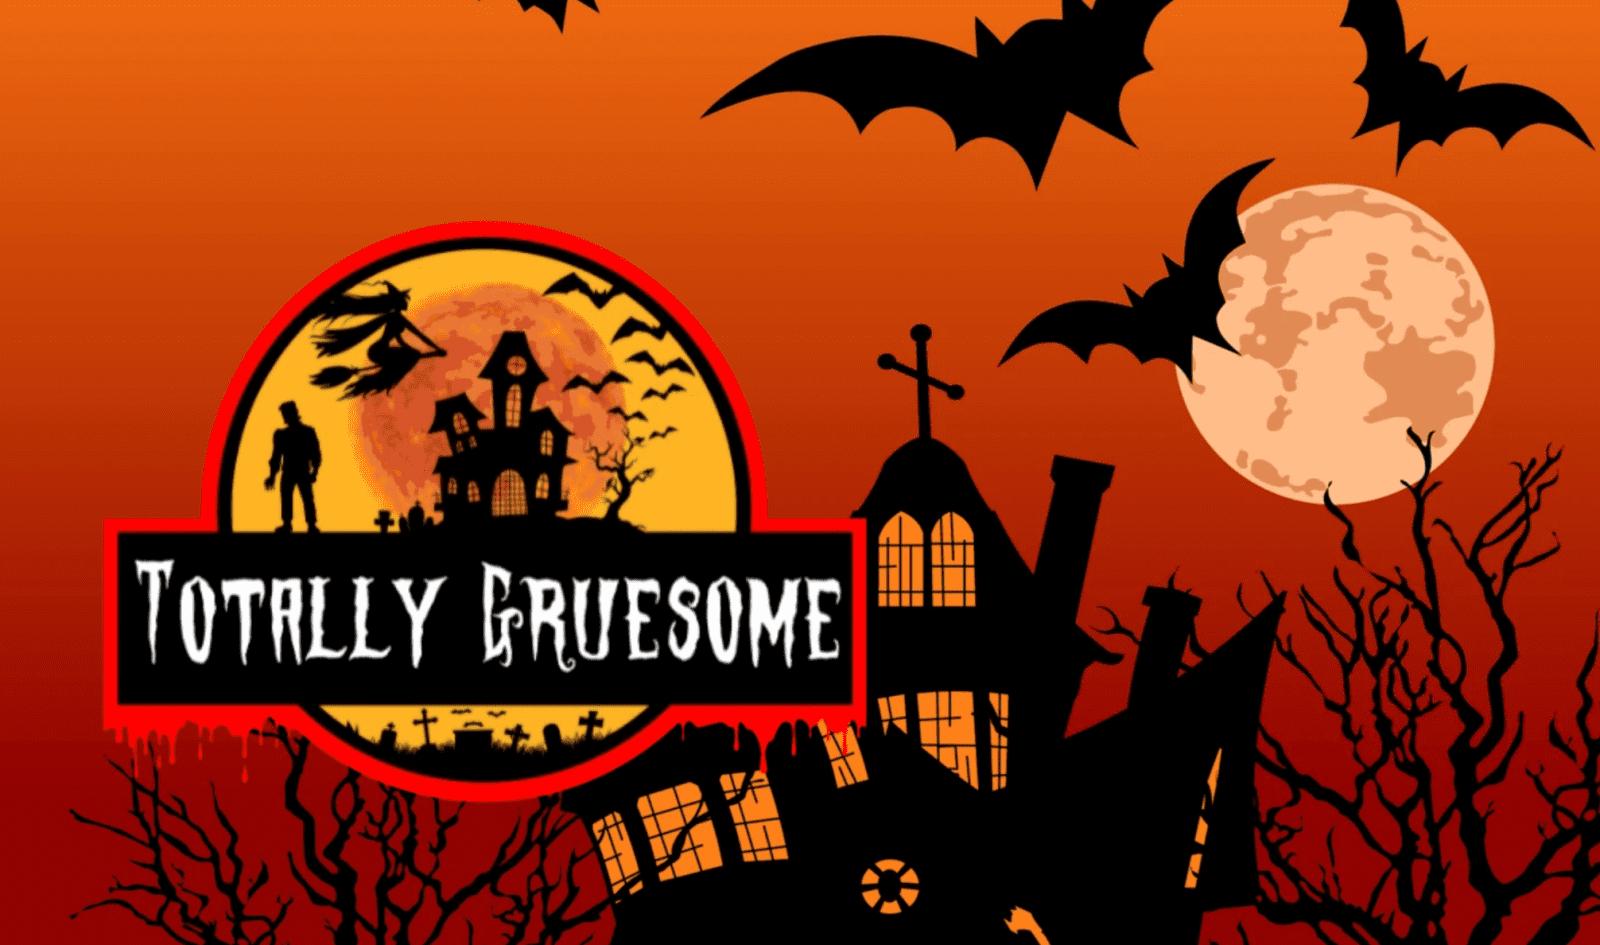 Totally Gruesome is bringing its spooky escape rooms for kids back to Manchester this Halloween, The Manc